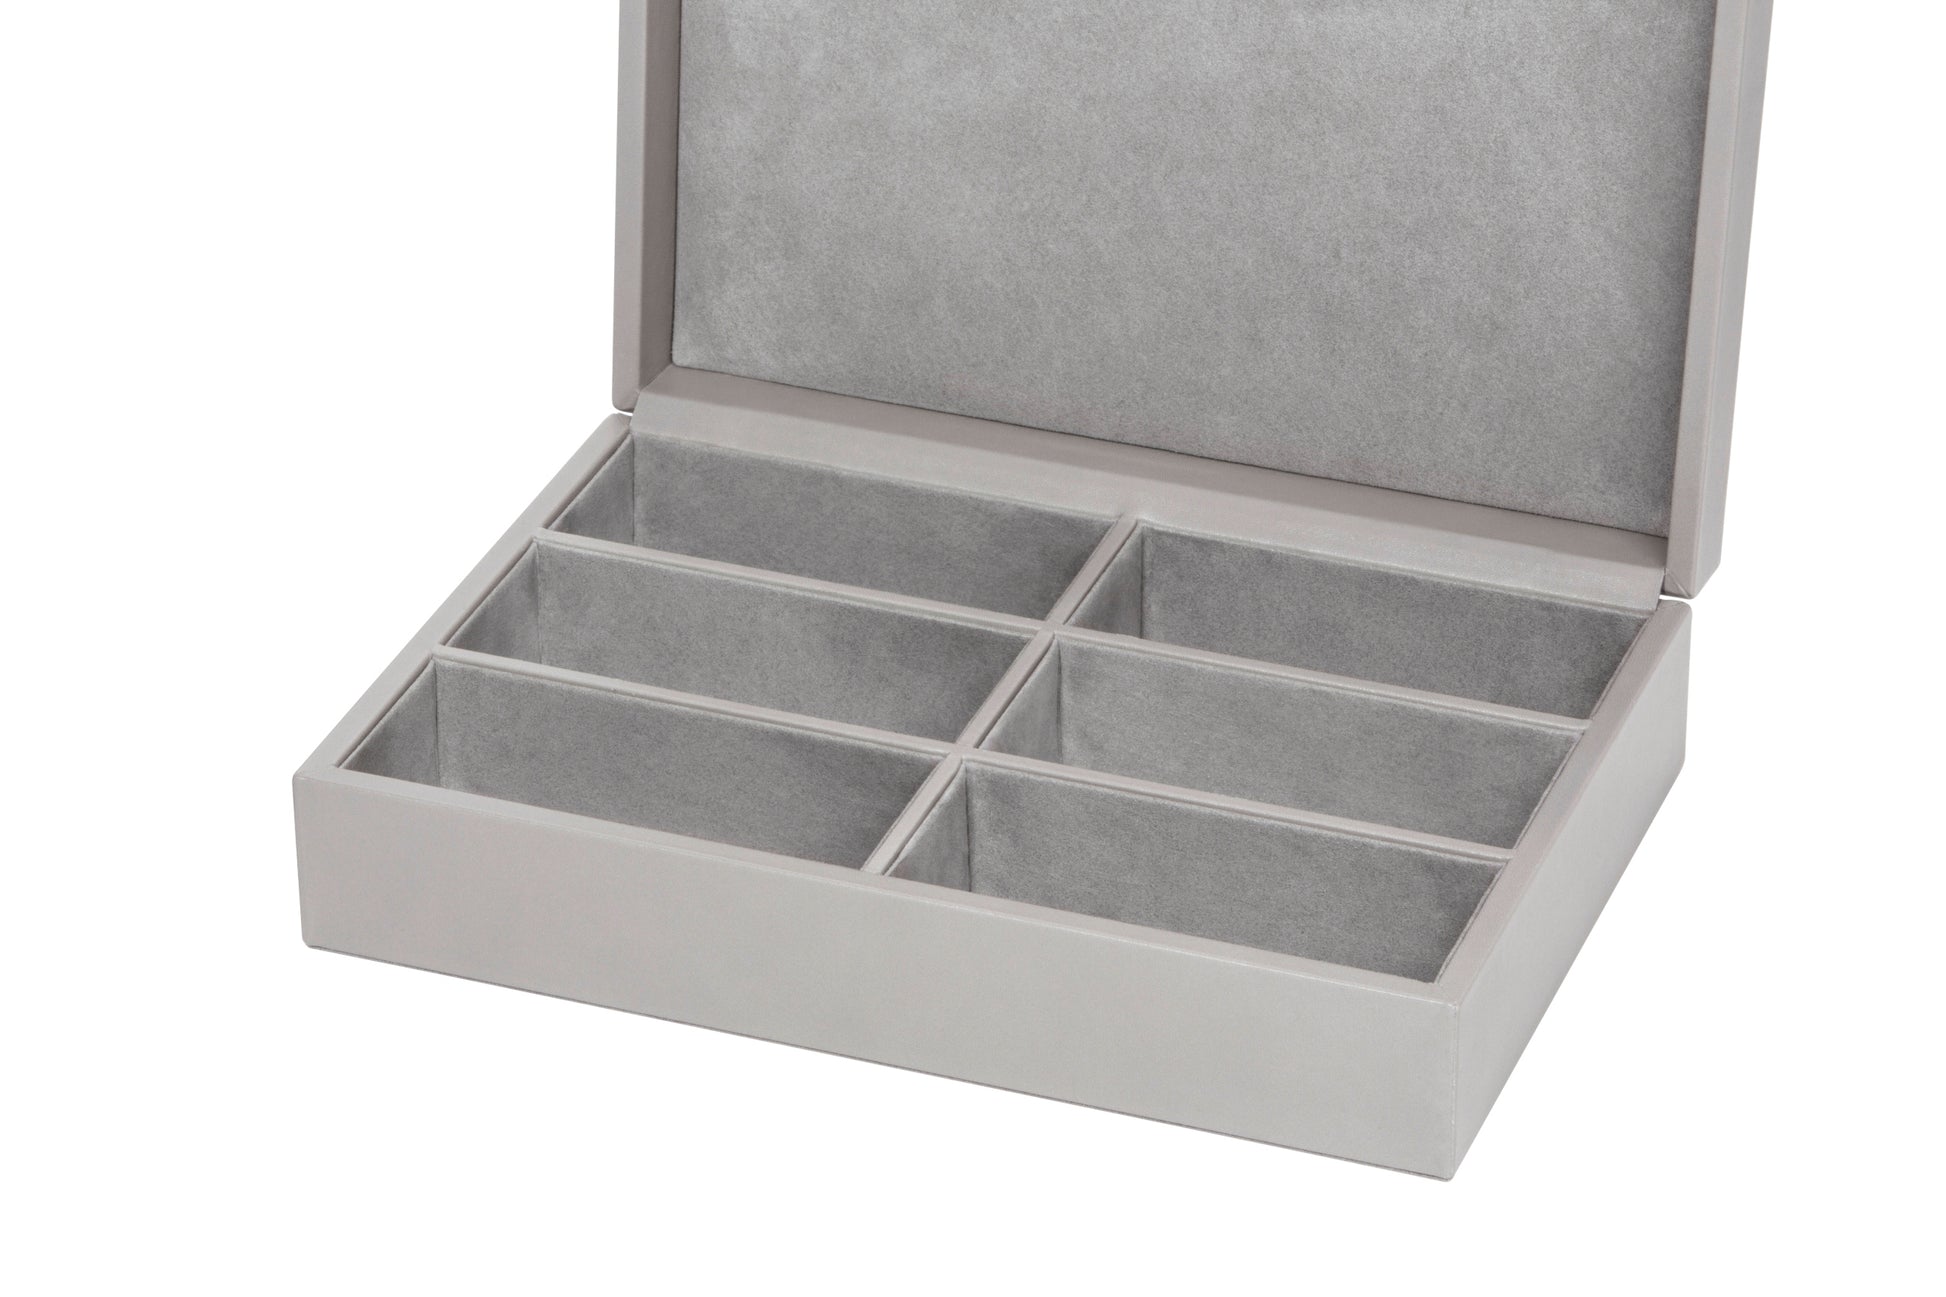 Riviere Mila Leather-Covered Glasses Box With Suede Lining | Stylish Design with 'Belt' Decoration | Holds up to 6 Pairs of Glasses | Suede Lining for Added Protection | Explore a Range of Luxury Glasses Boxes at 2Jour Concierge, #1 luxury high-end gift & lifestyle shop